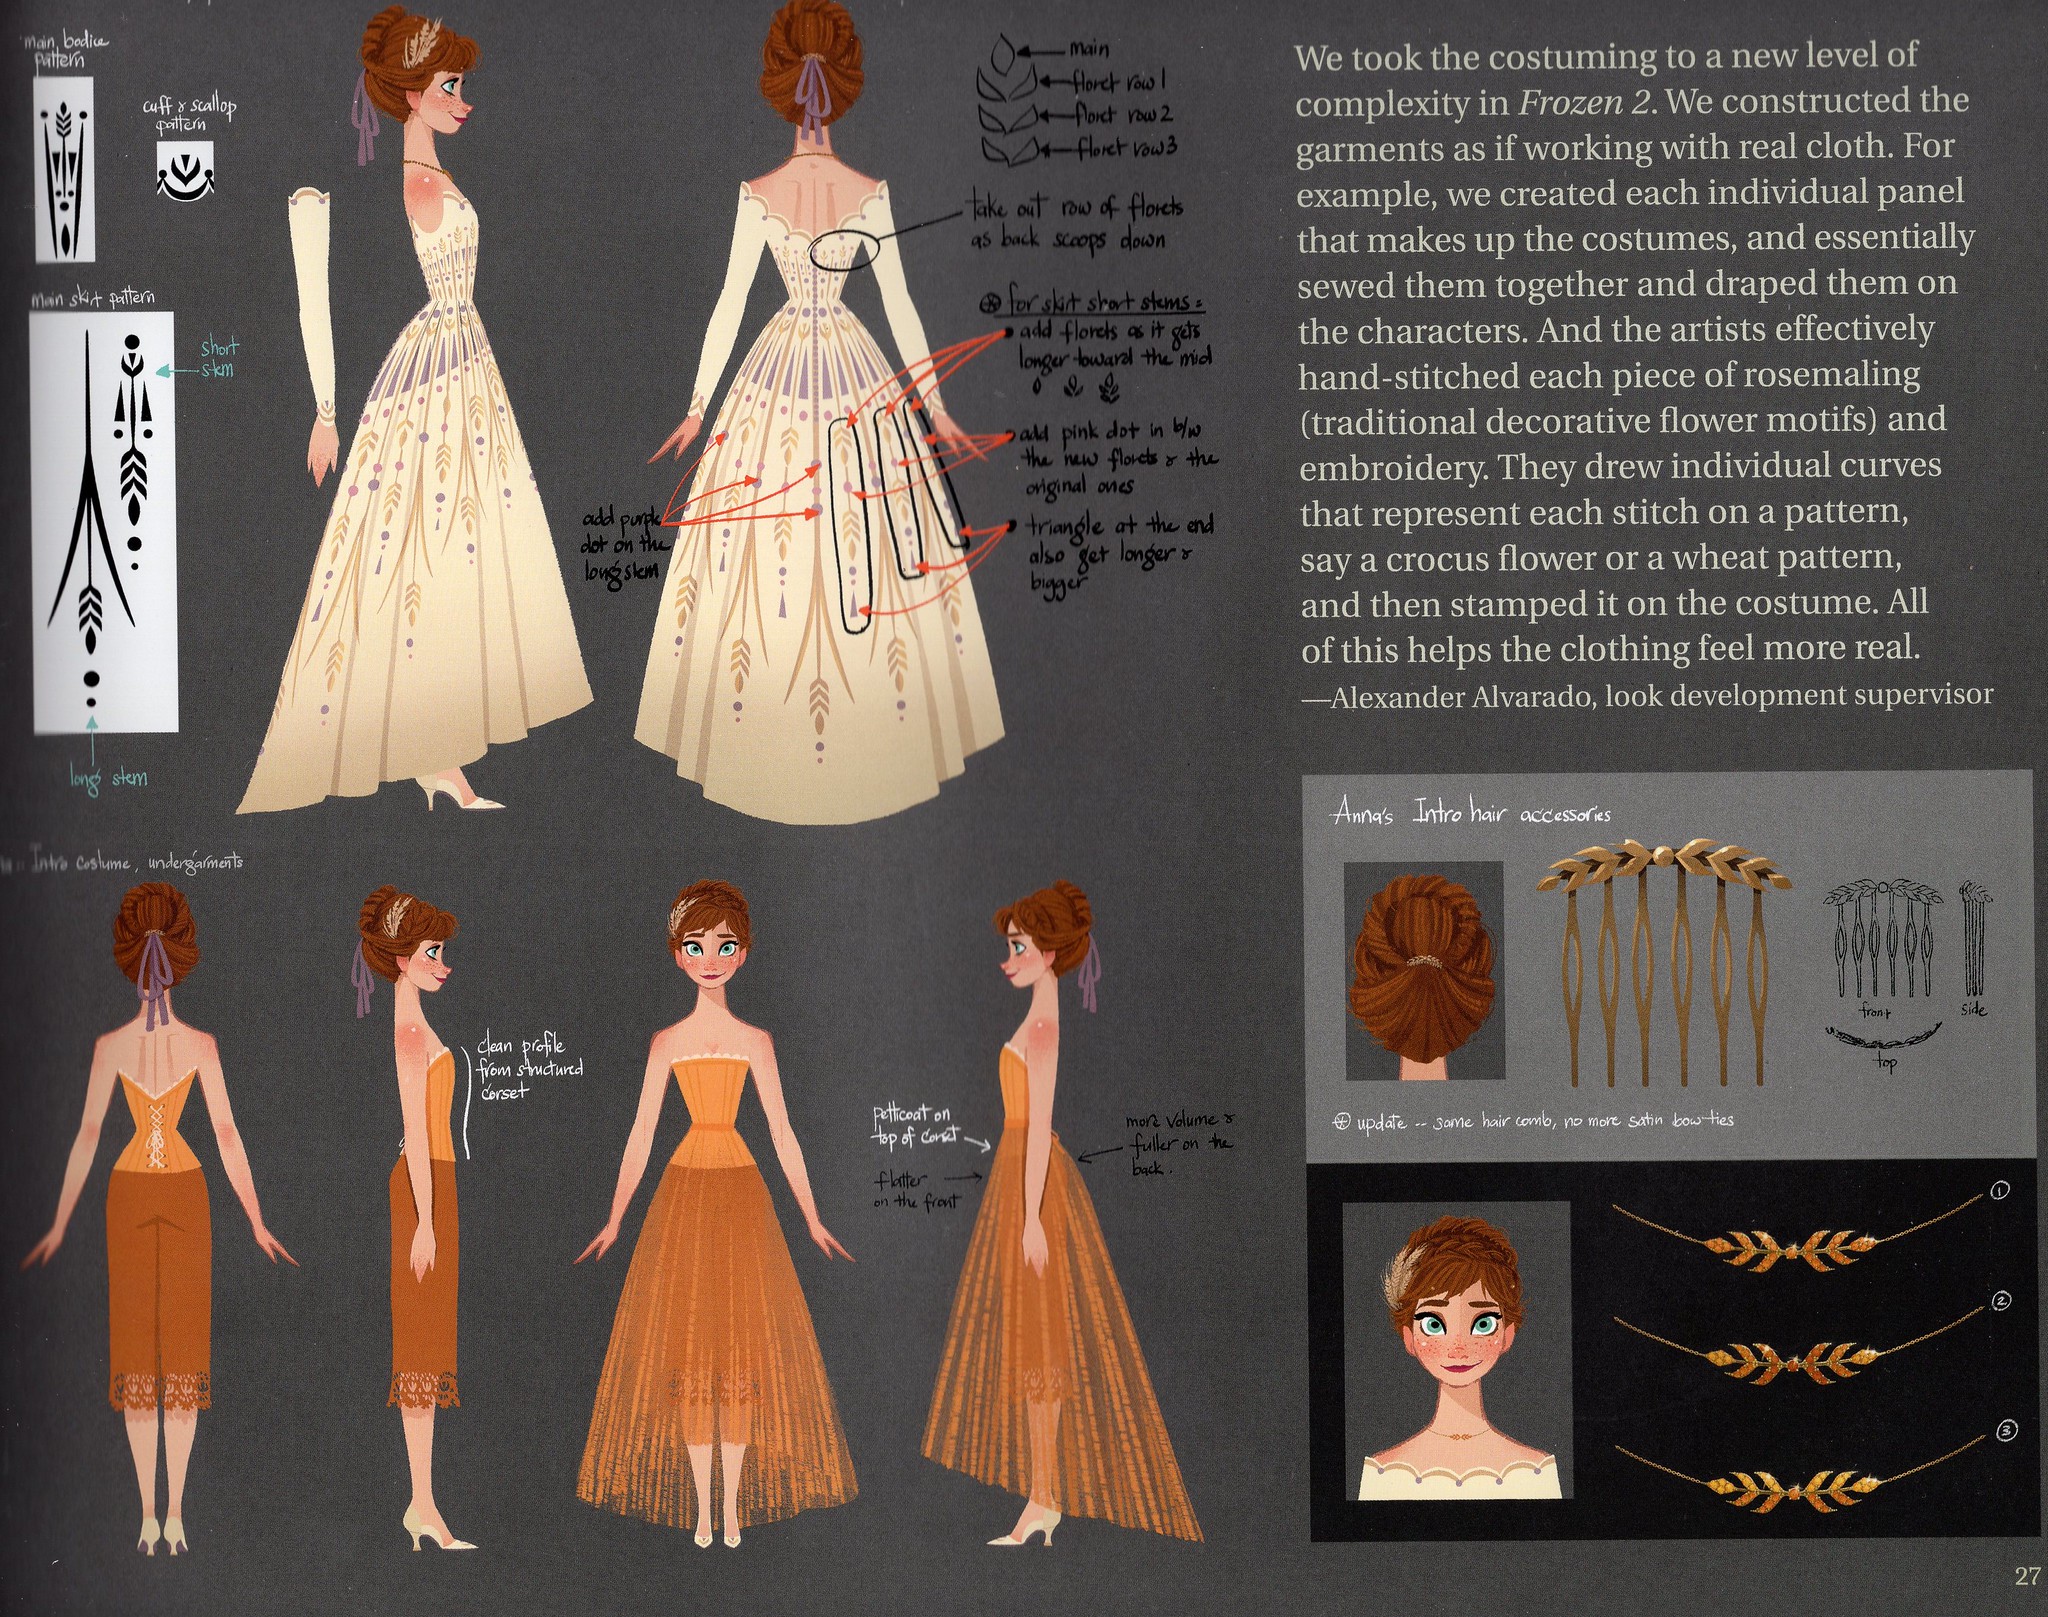 Merg ervaring toewijding Frozen 2 Anna's outfits concept art, including new Arendelle Queen dress  from final - YouLoveIt.com